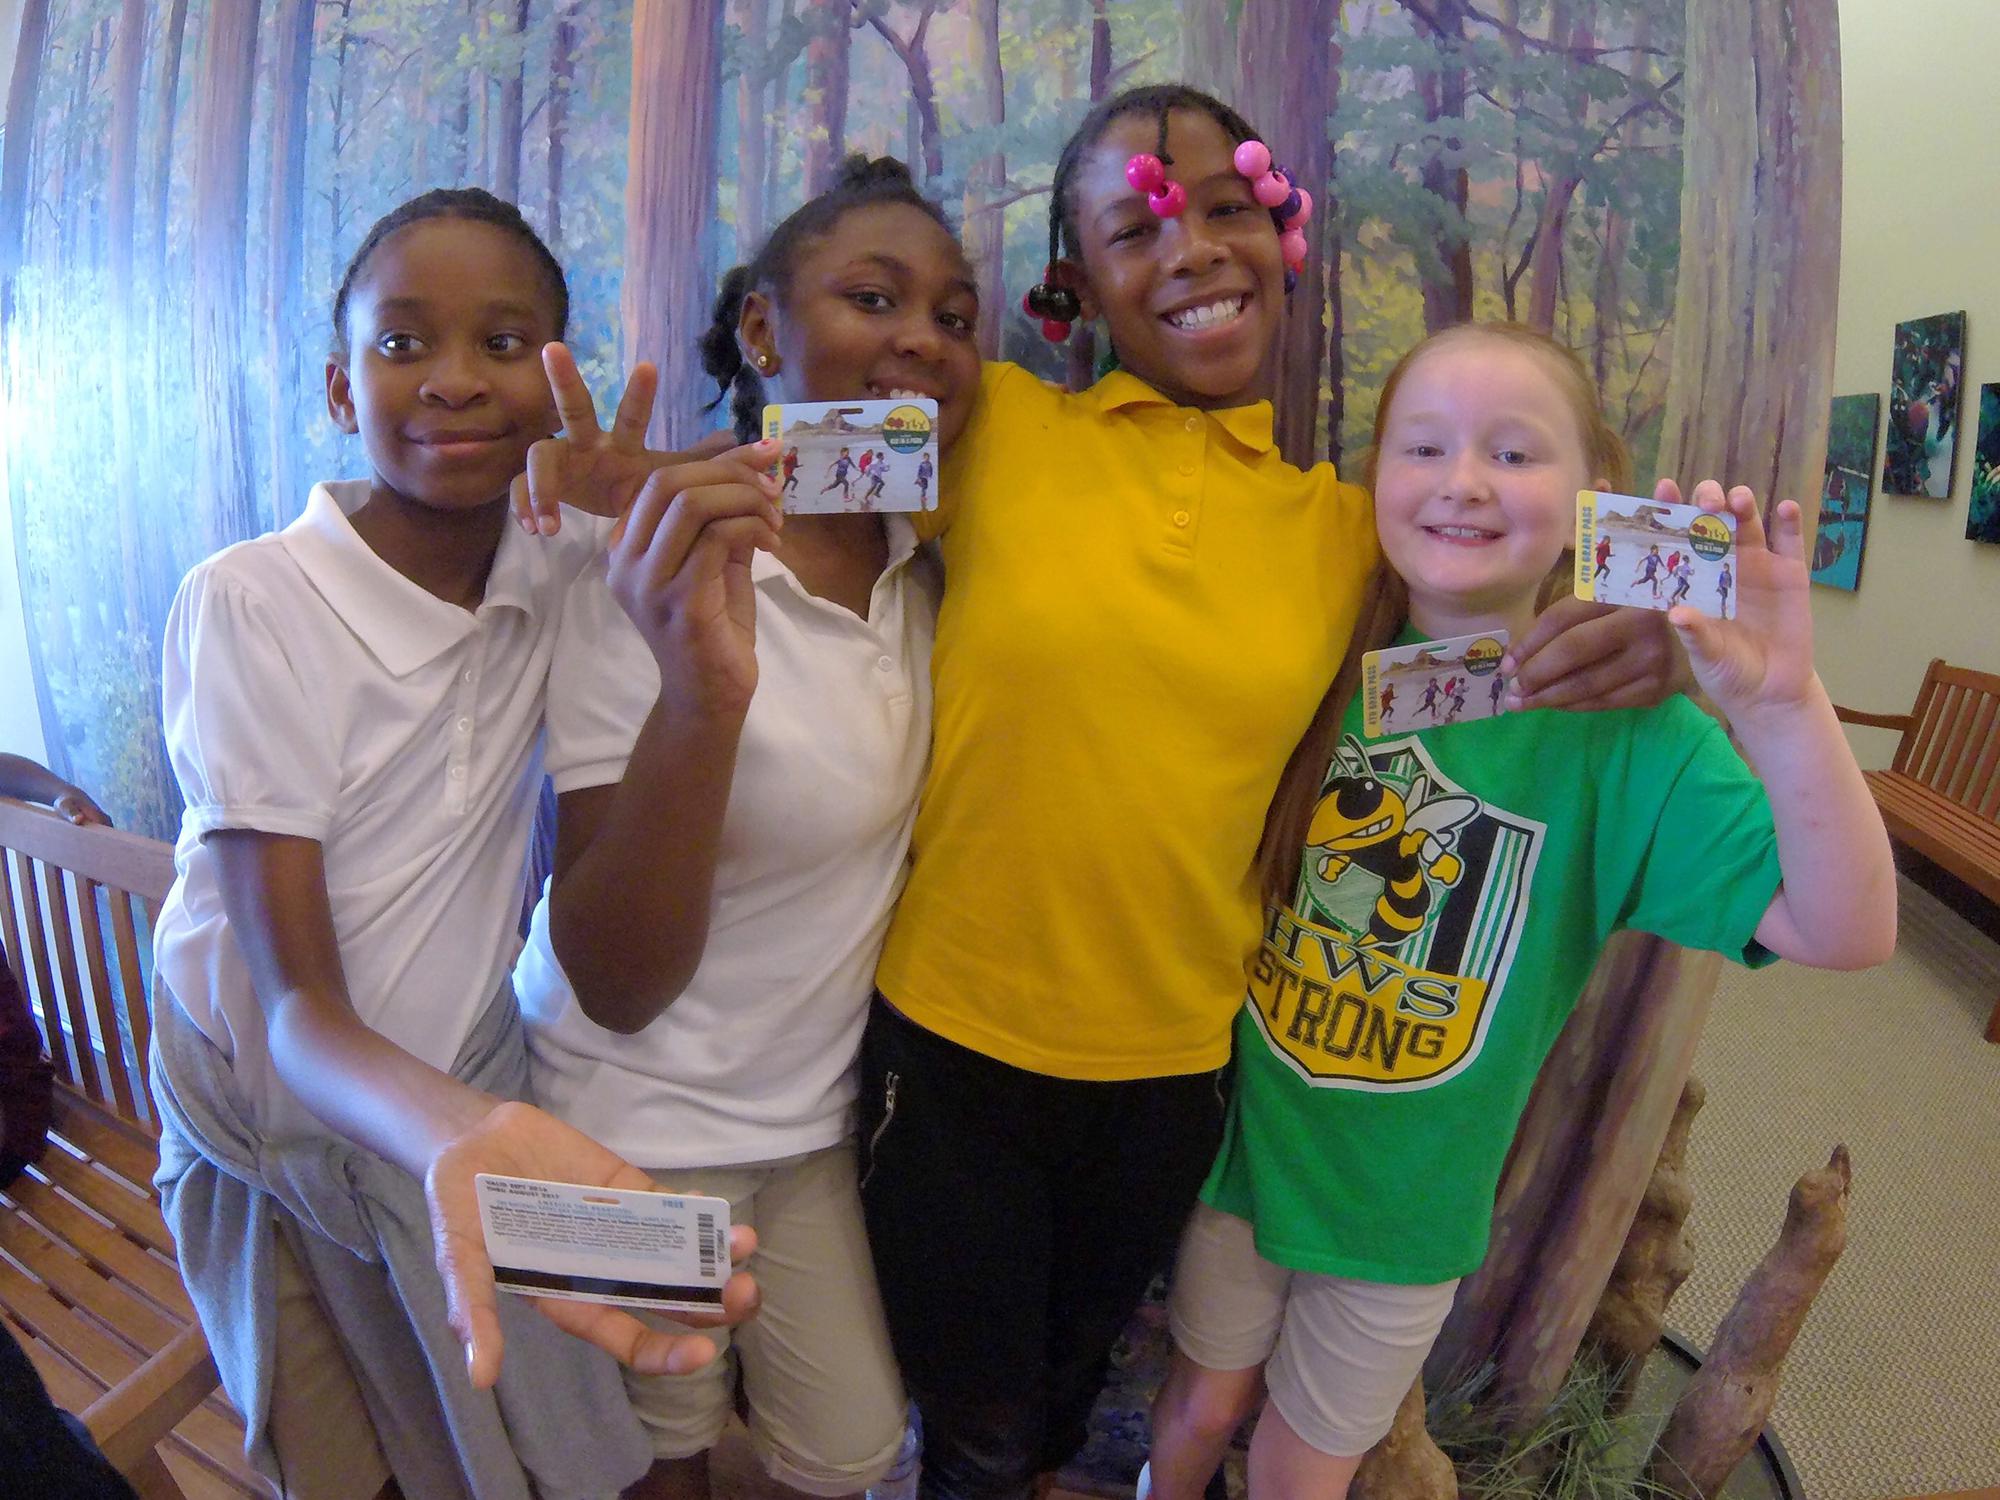 Four fourth-grade girls show off their personal identification cards that are passes to federal parks.